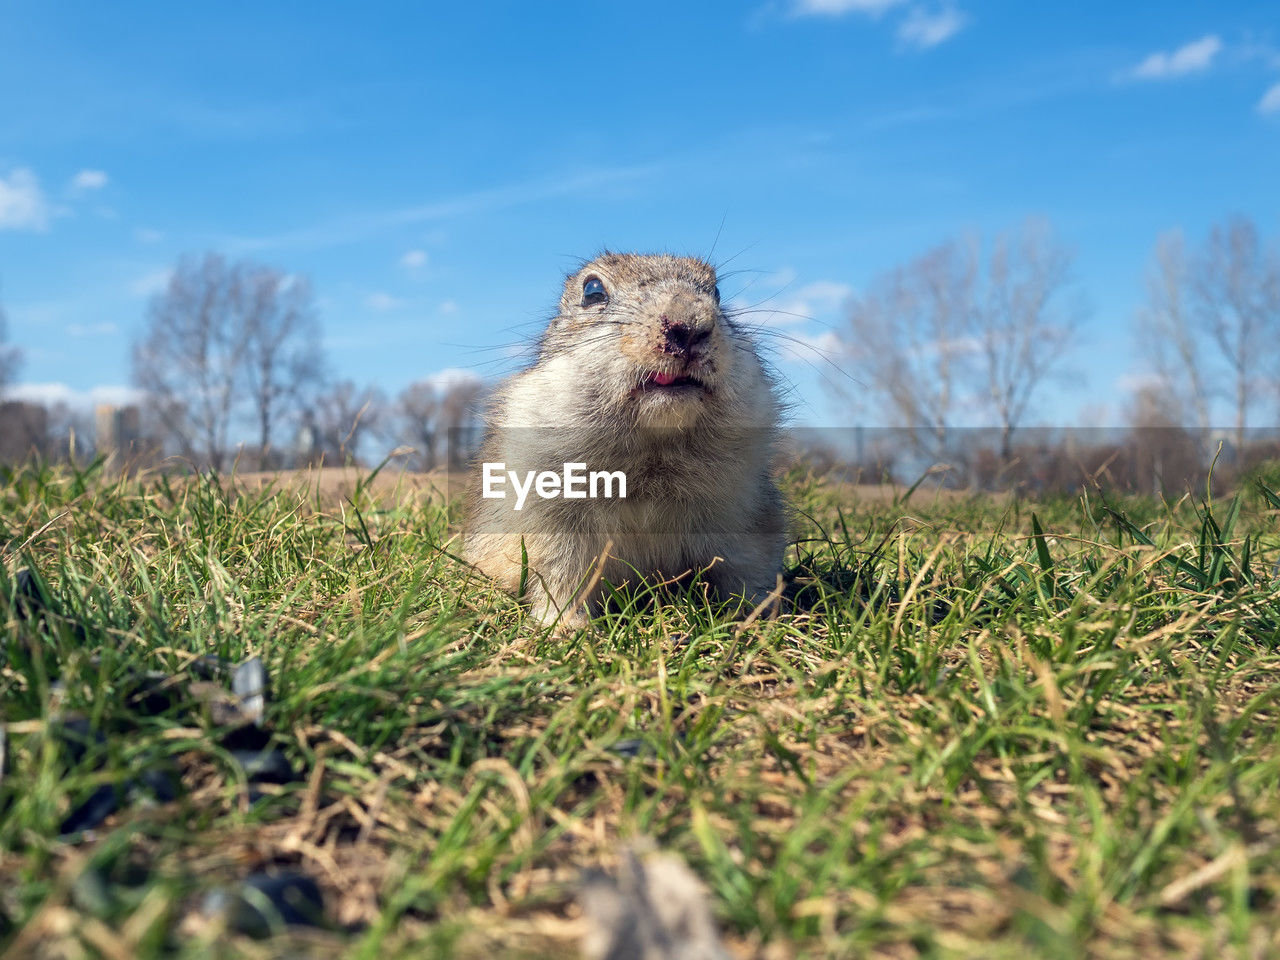 animal themes, animal, mammal, one animal, animal wildlife, grass, sky, rodent, nature, plant, wildlife, pet, no people, portrait, day, land, selective focus, prairie dog, outdoors, looking at camera, field, front view, cloud, domestic animals, hamster